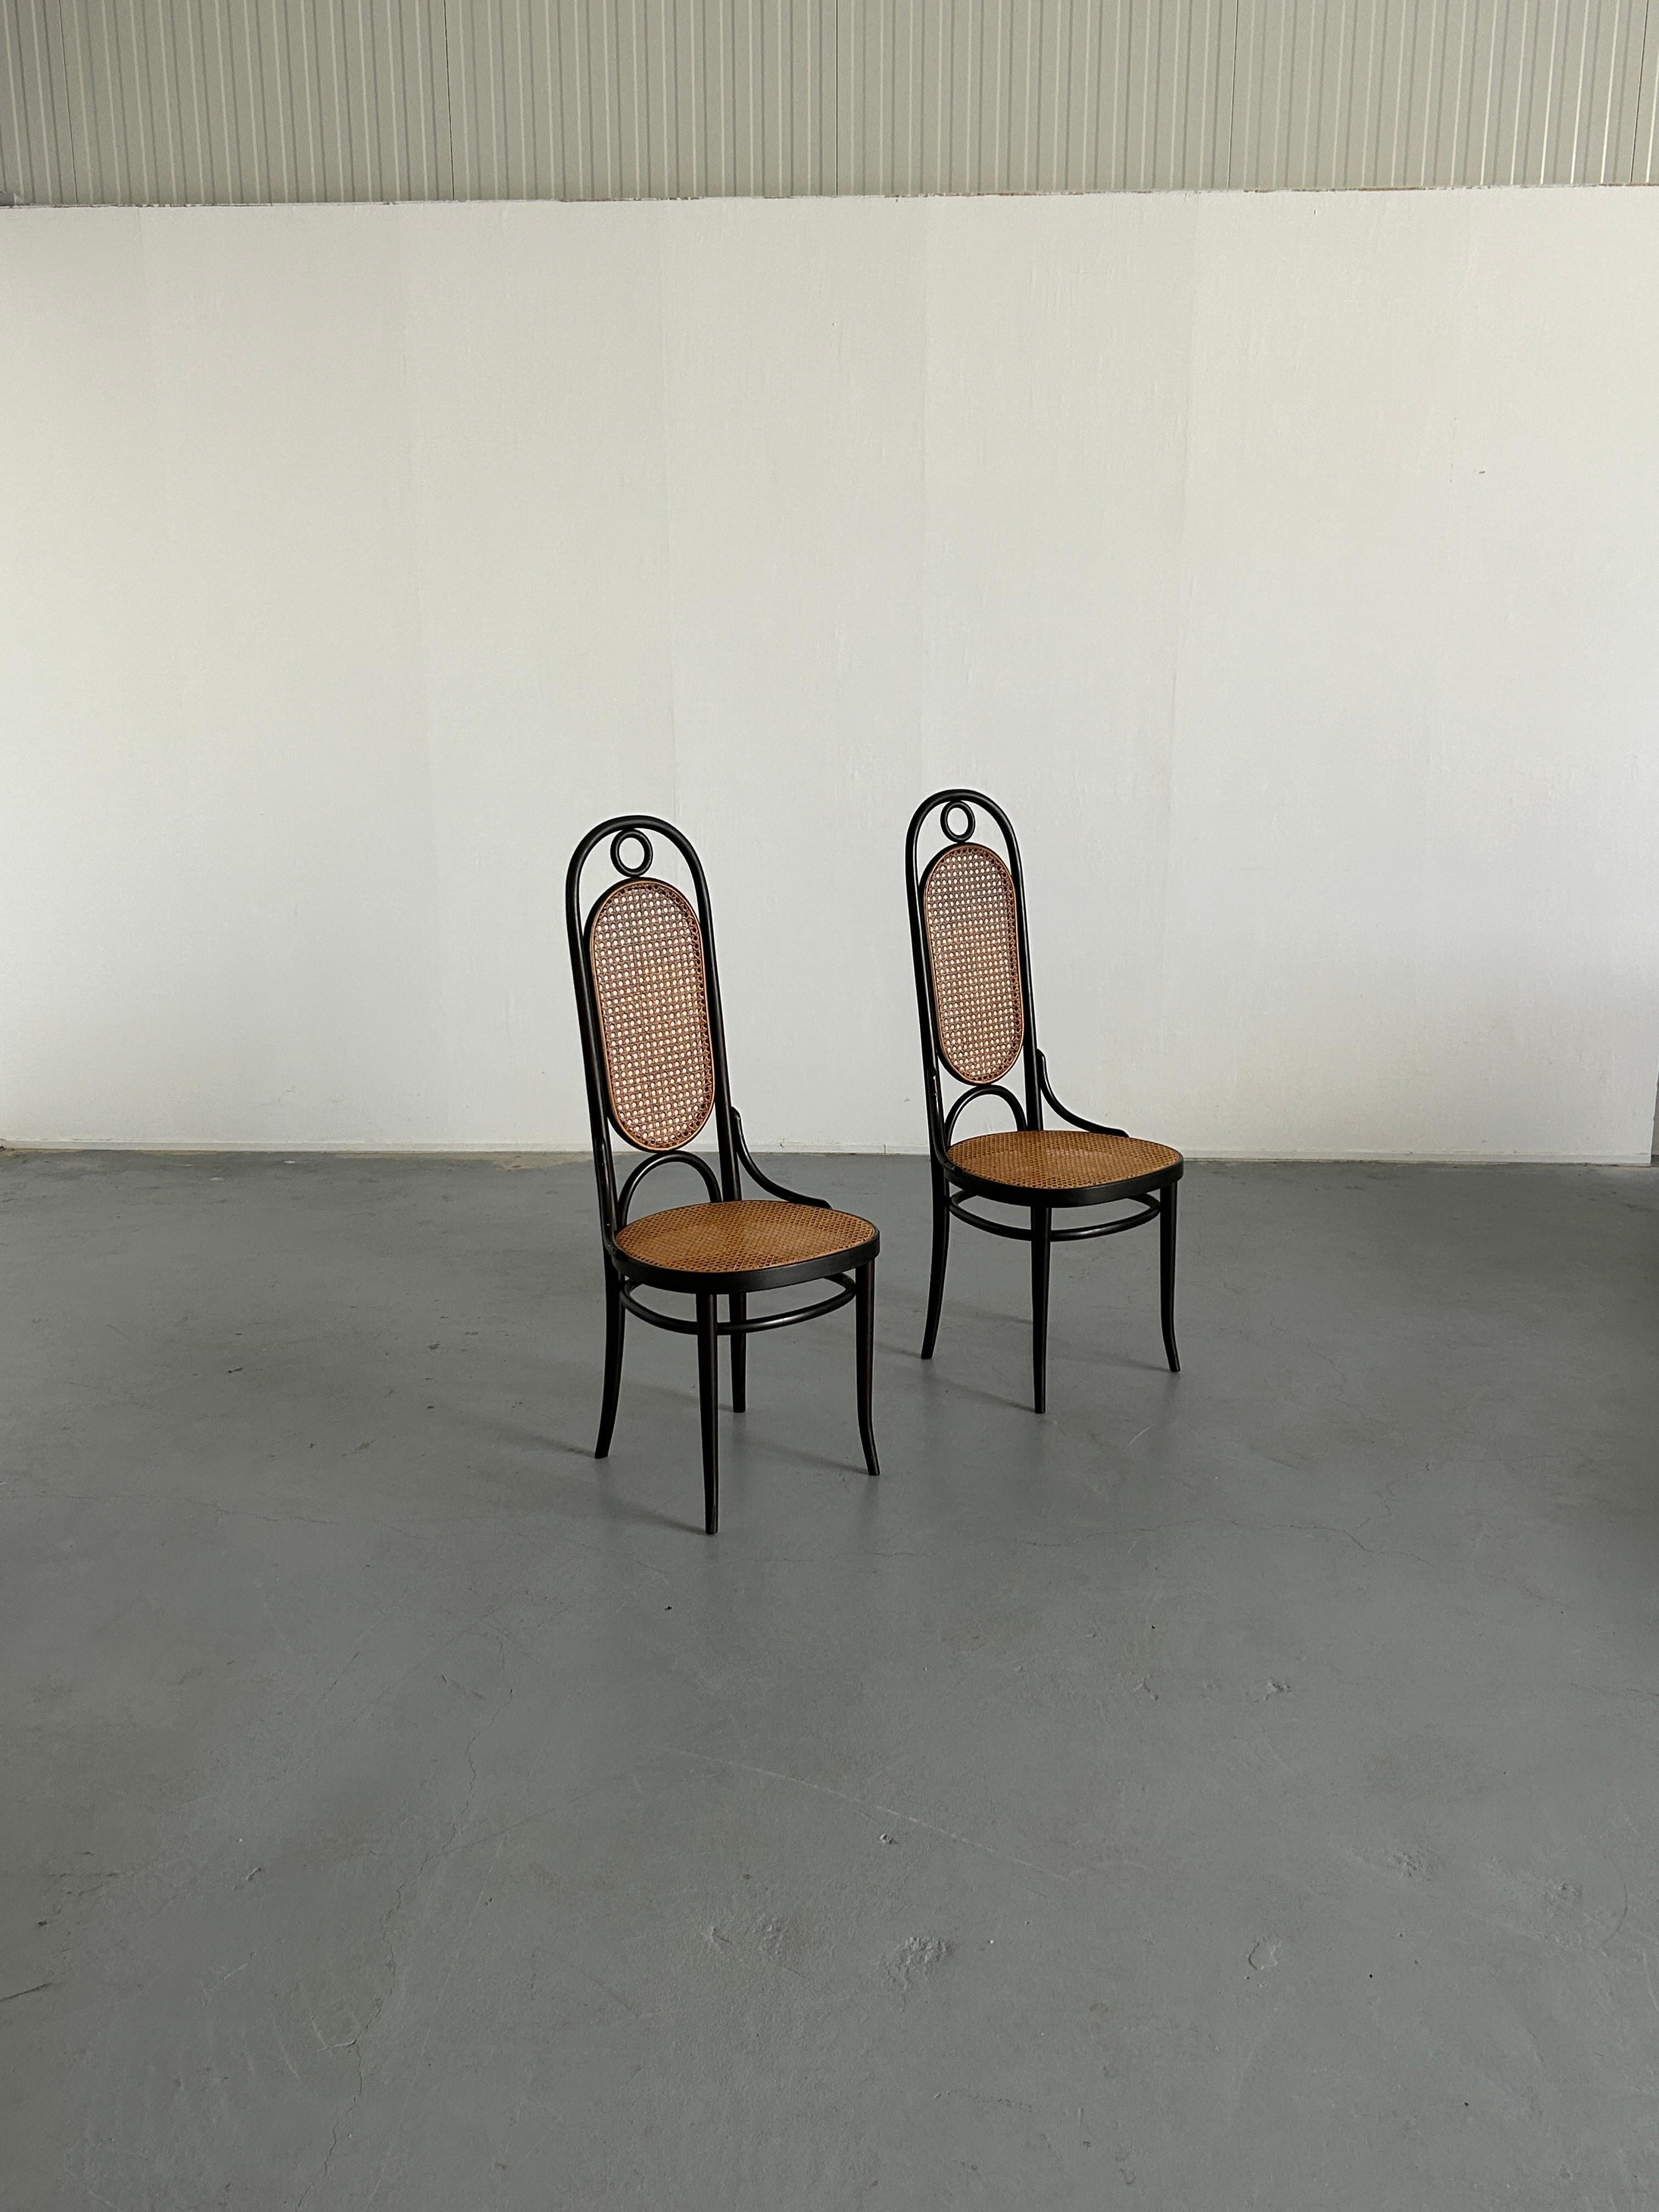 A set of two beautiful Thonet bentwood chairs, popular high backrest known as model 207R or model no. 17.
Original Thonet production of the 1950s.
Thonet label present underneath the seats.

The chairs are in good vintage condition with expected